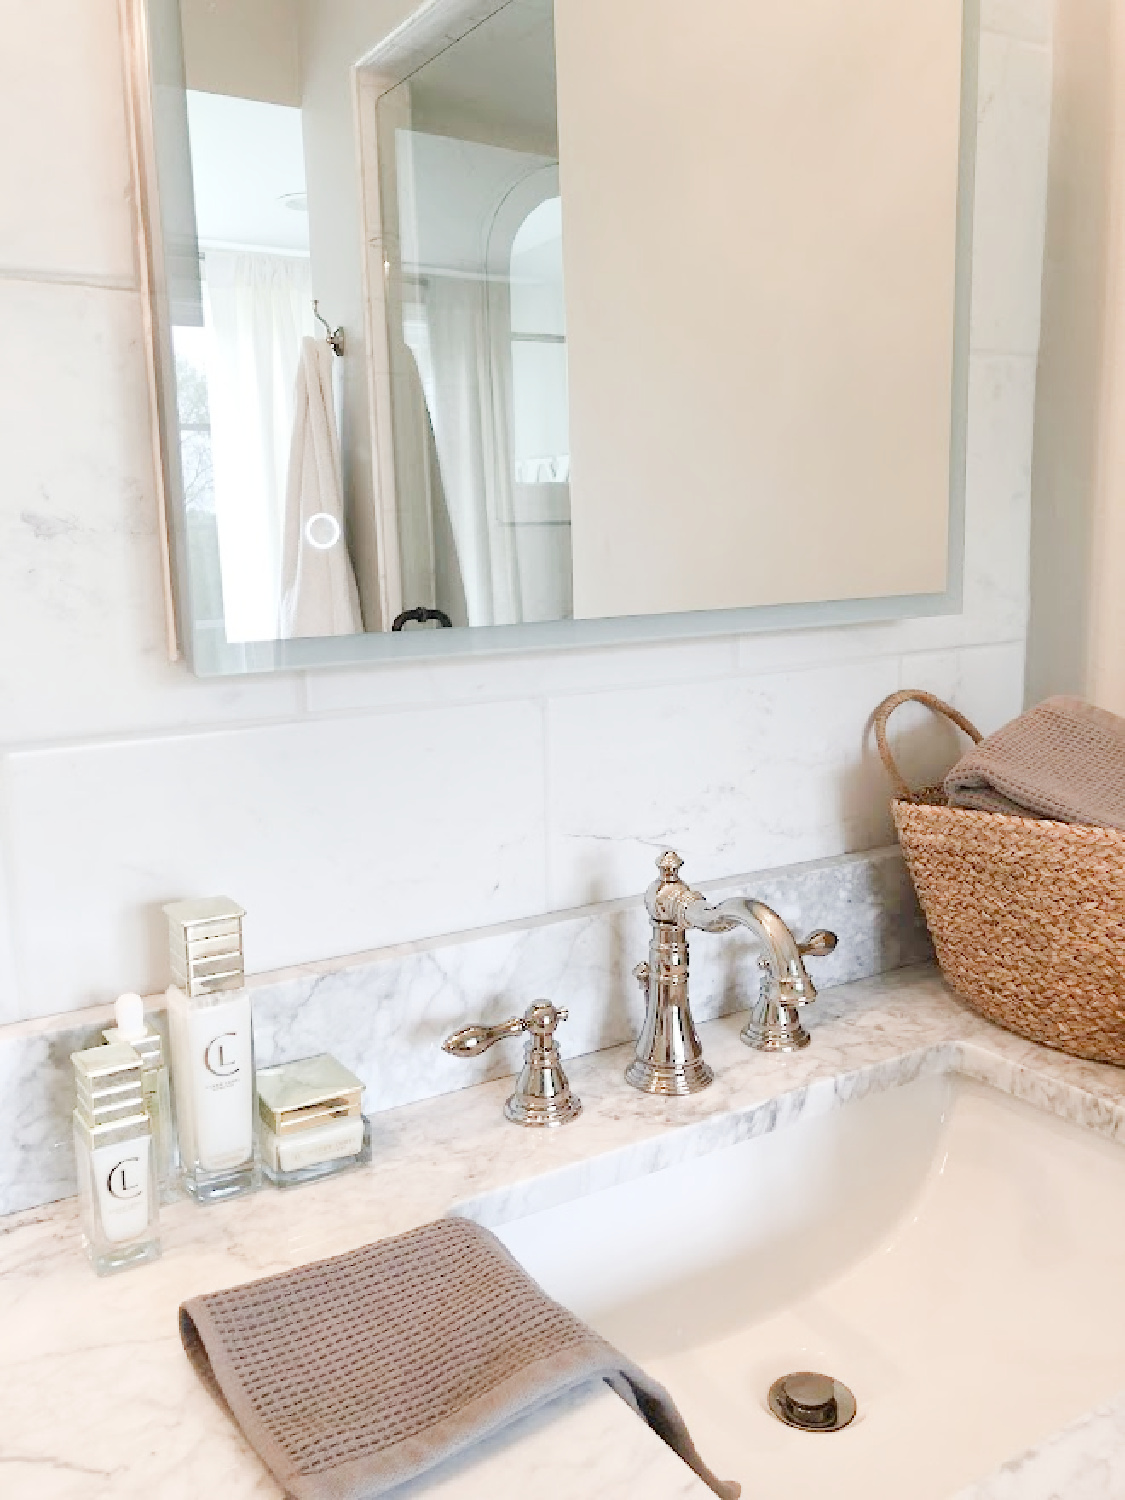 Clear Label Skincare essentials on my bathroom vanity - Hello Lovely Studio. #cleanskincare #clearlabelskincare